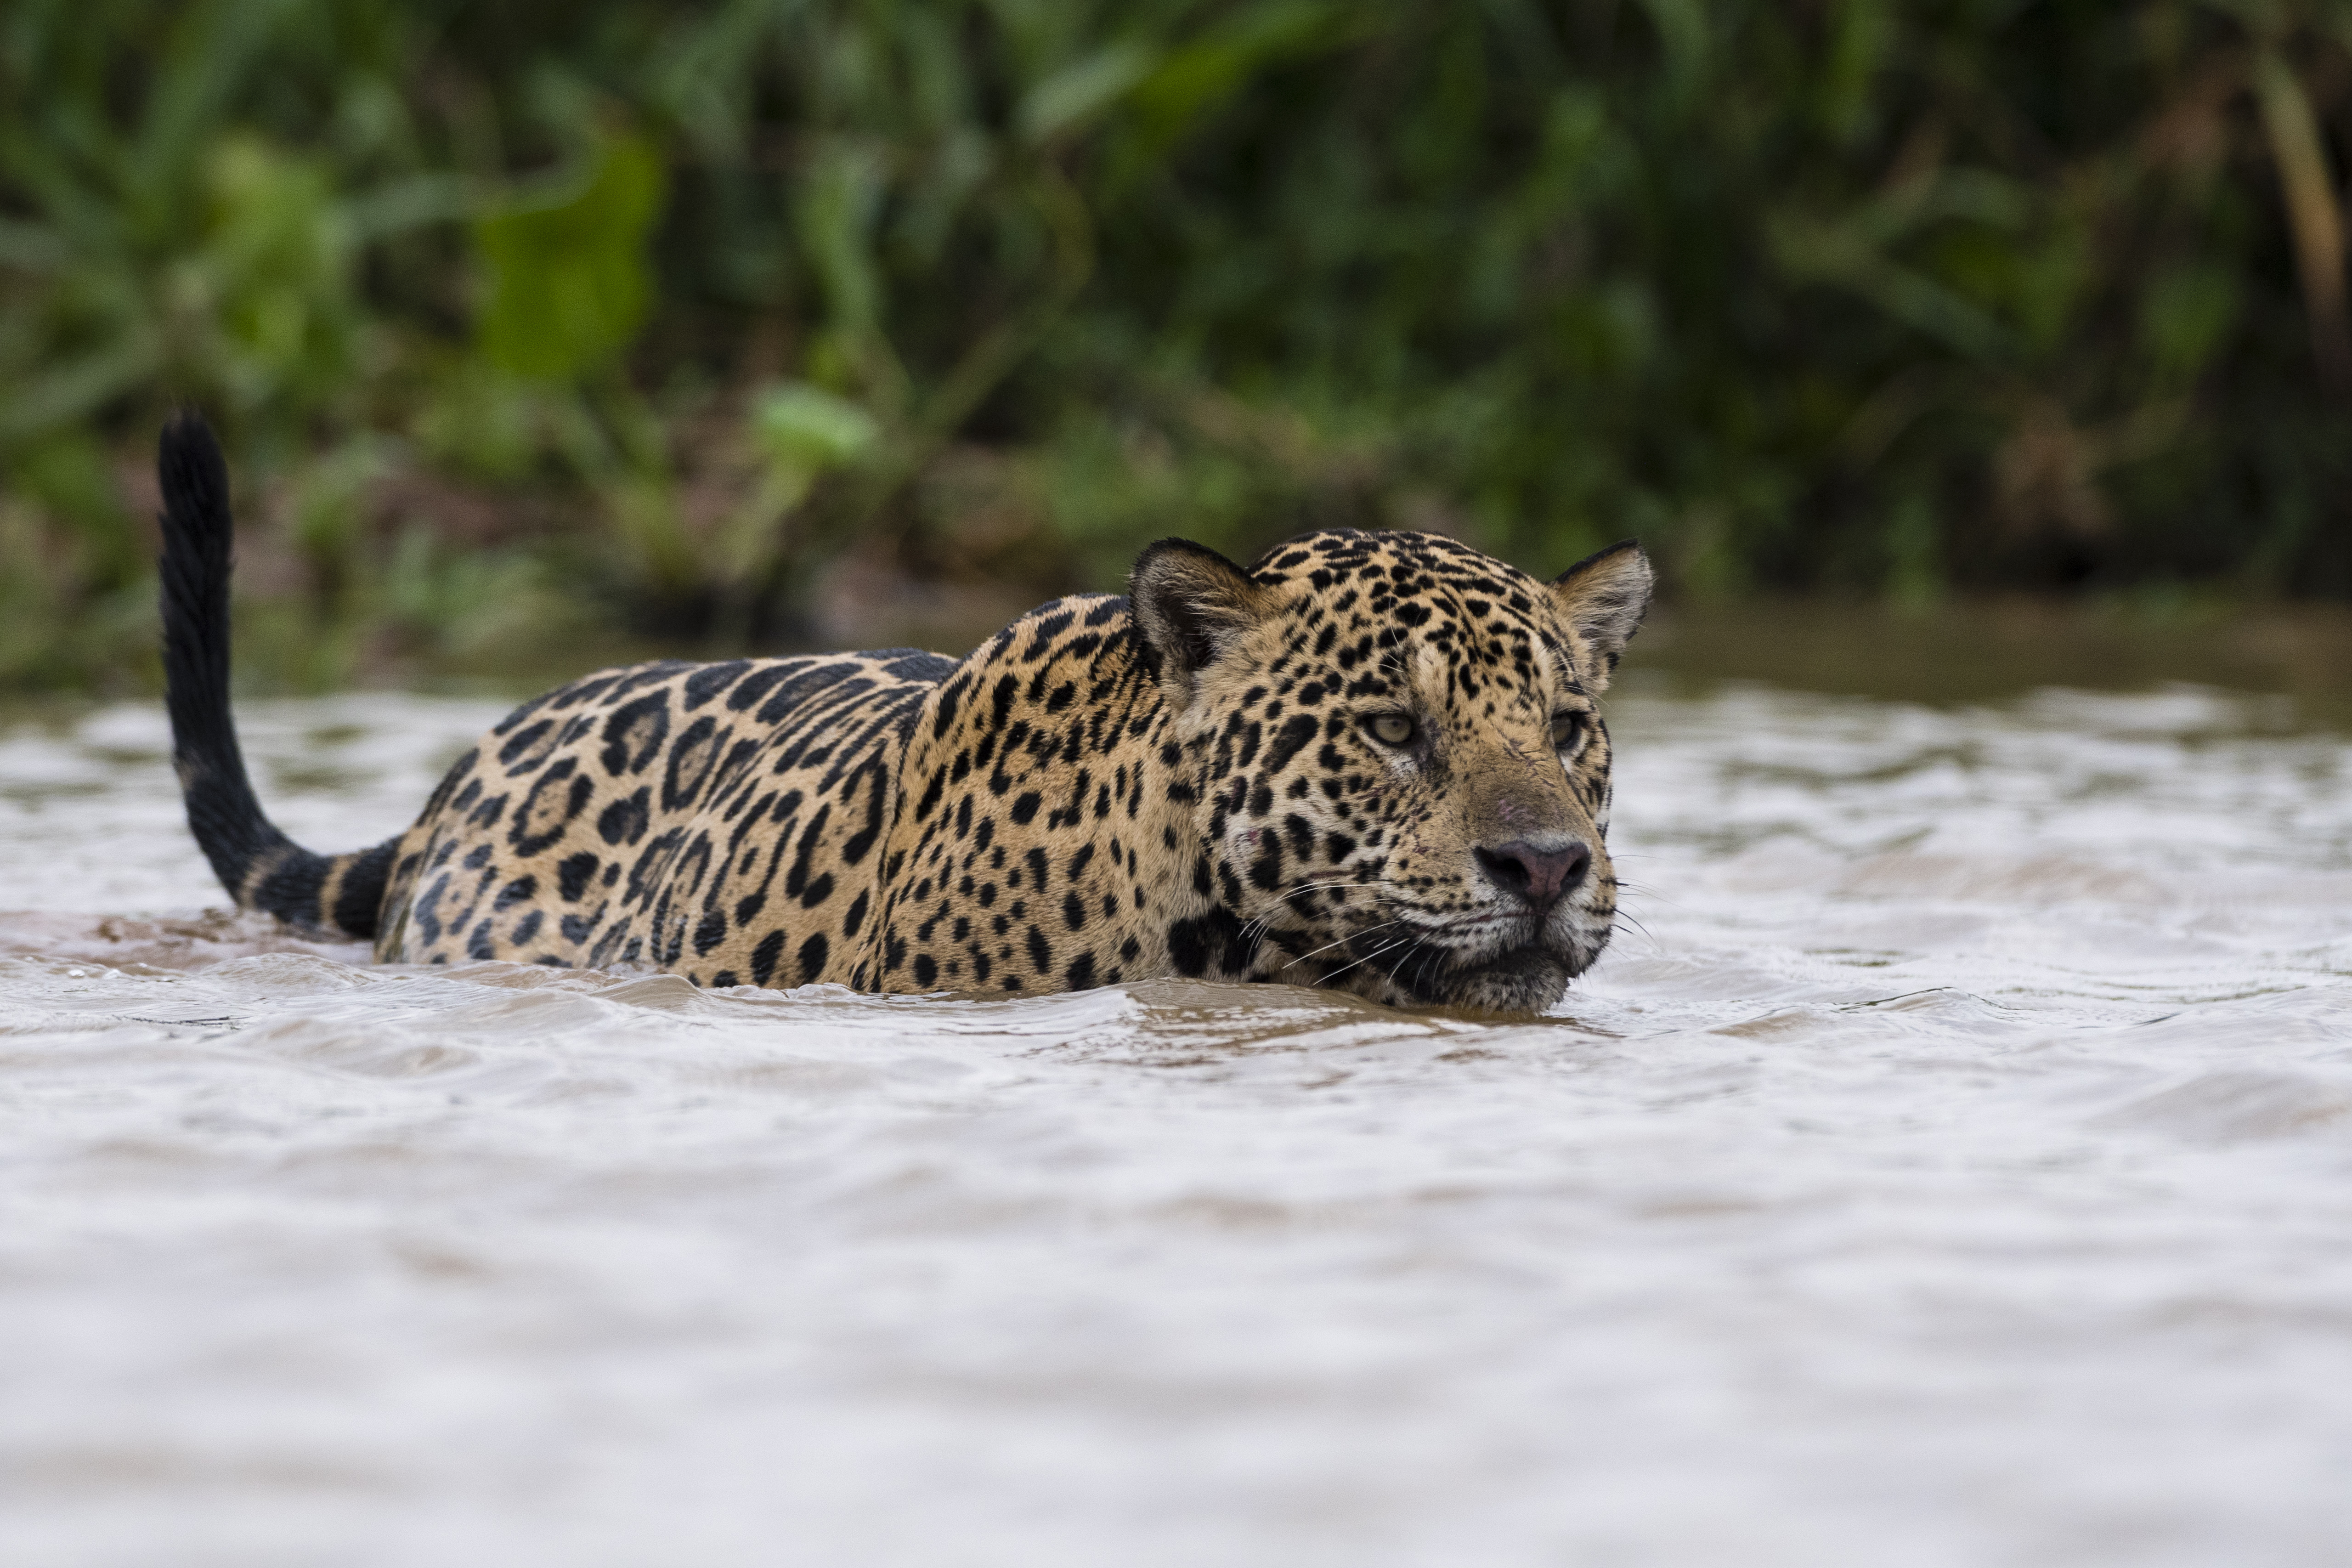 Jaguar walking into water in Pantanal, Mato Grosso, Brazil. Image Credit: Envato Creative Commons.